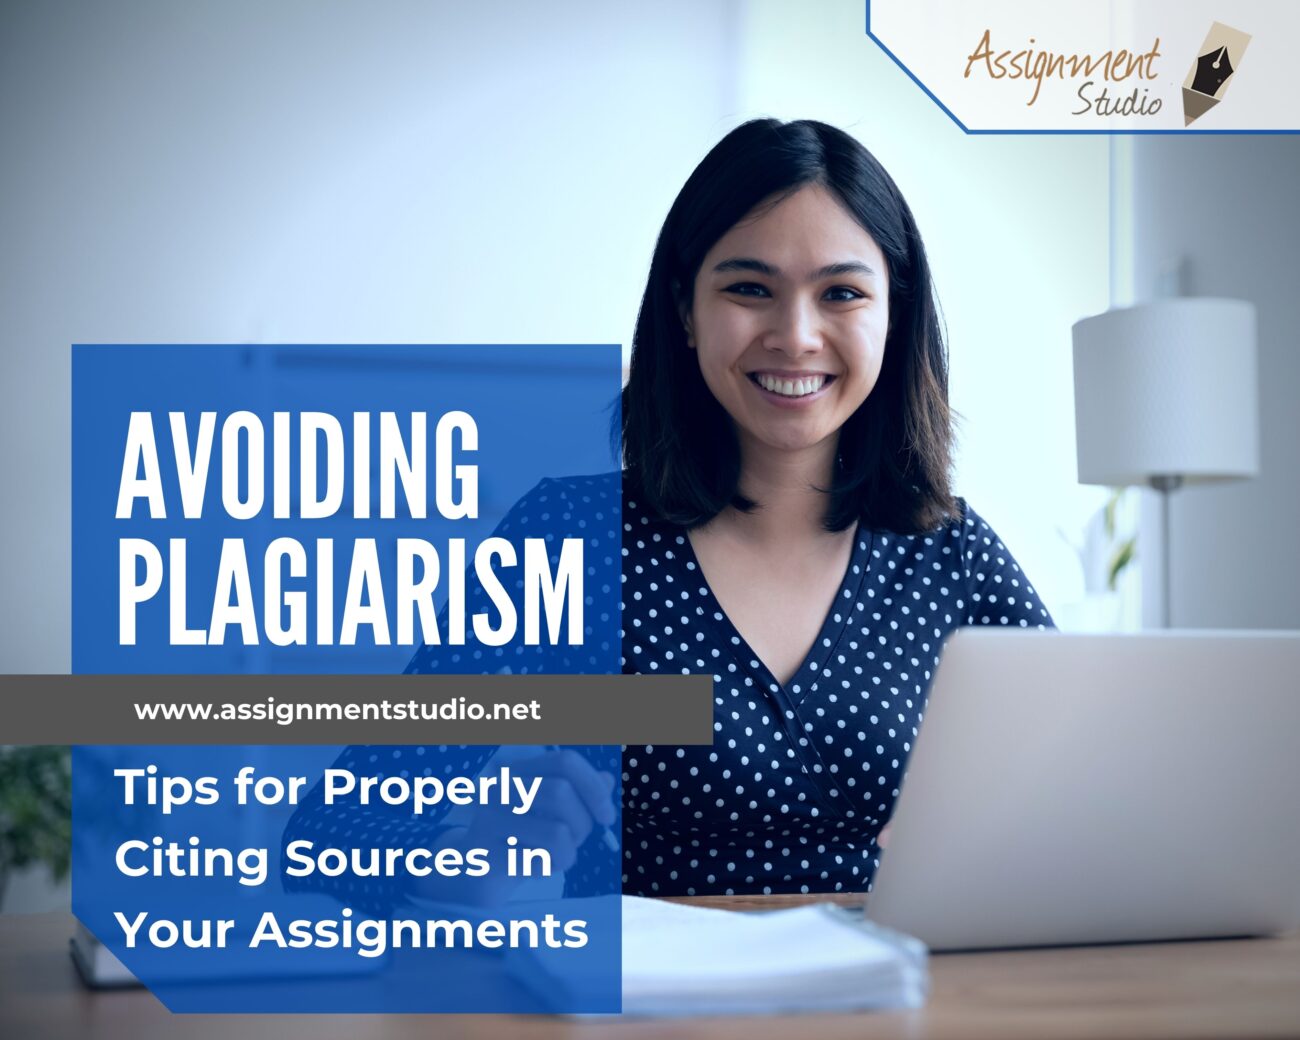 Avoiding Plagiarism Tips for Properly Citing Sources in Your Assignments